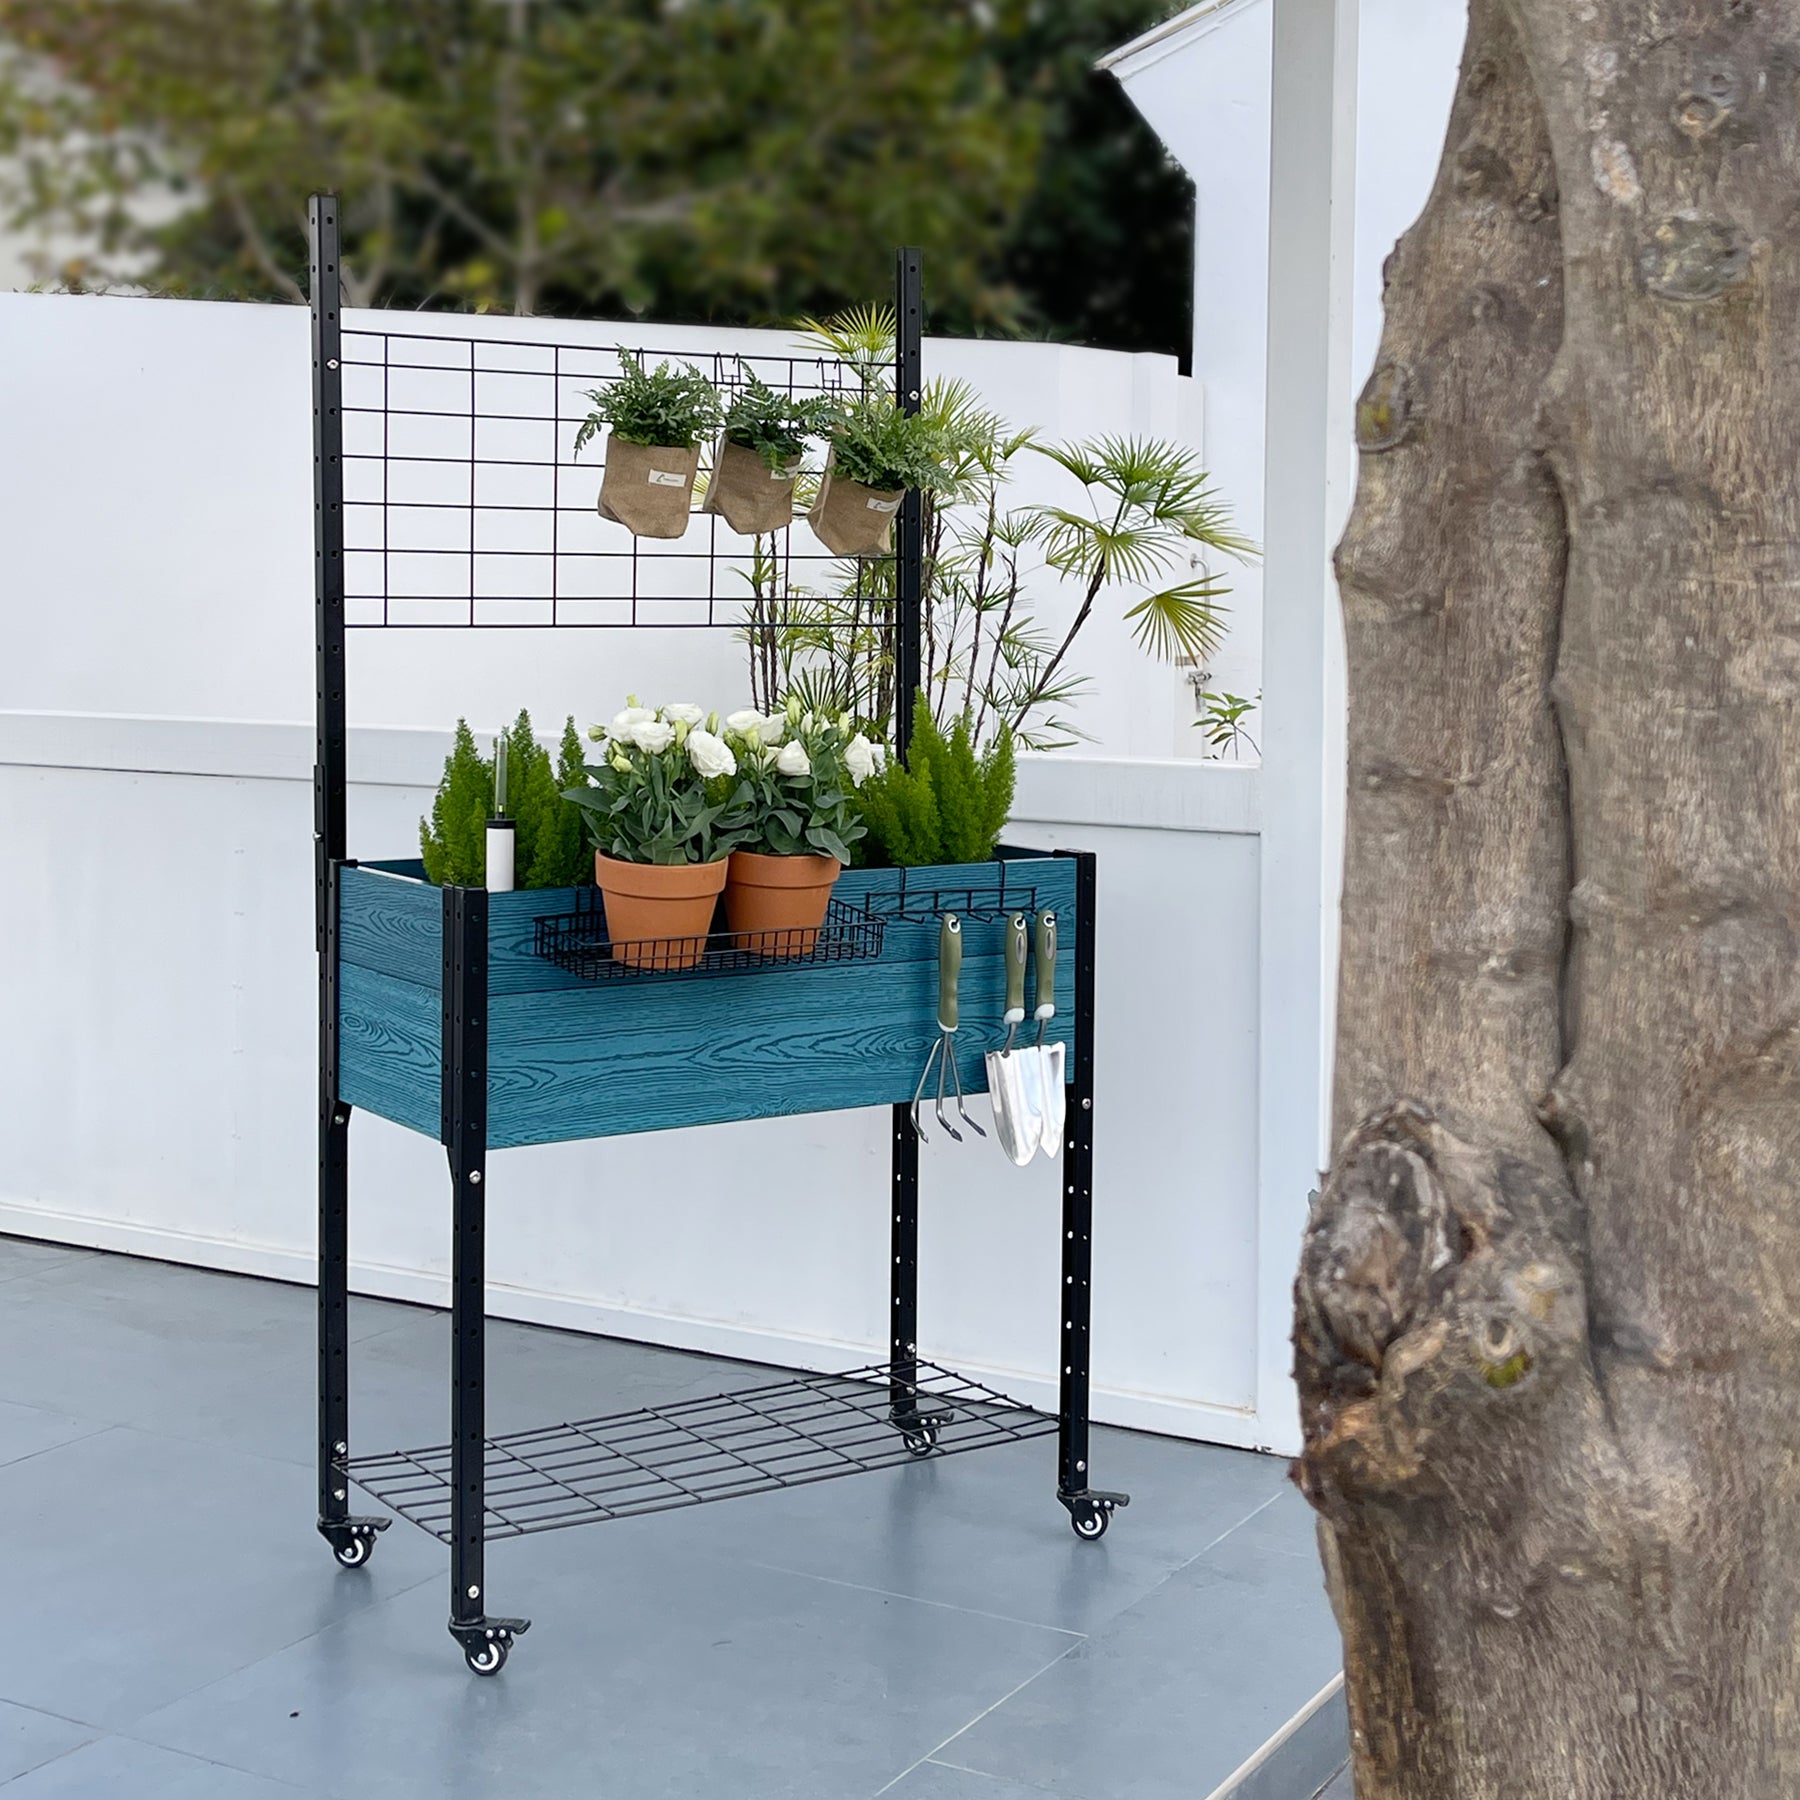 K2303 Self-watering Mobile Elevated Planter in Blue with Trellis and Basket & Hook Set